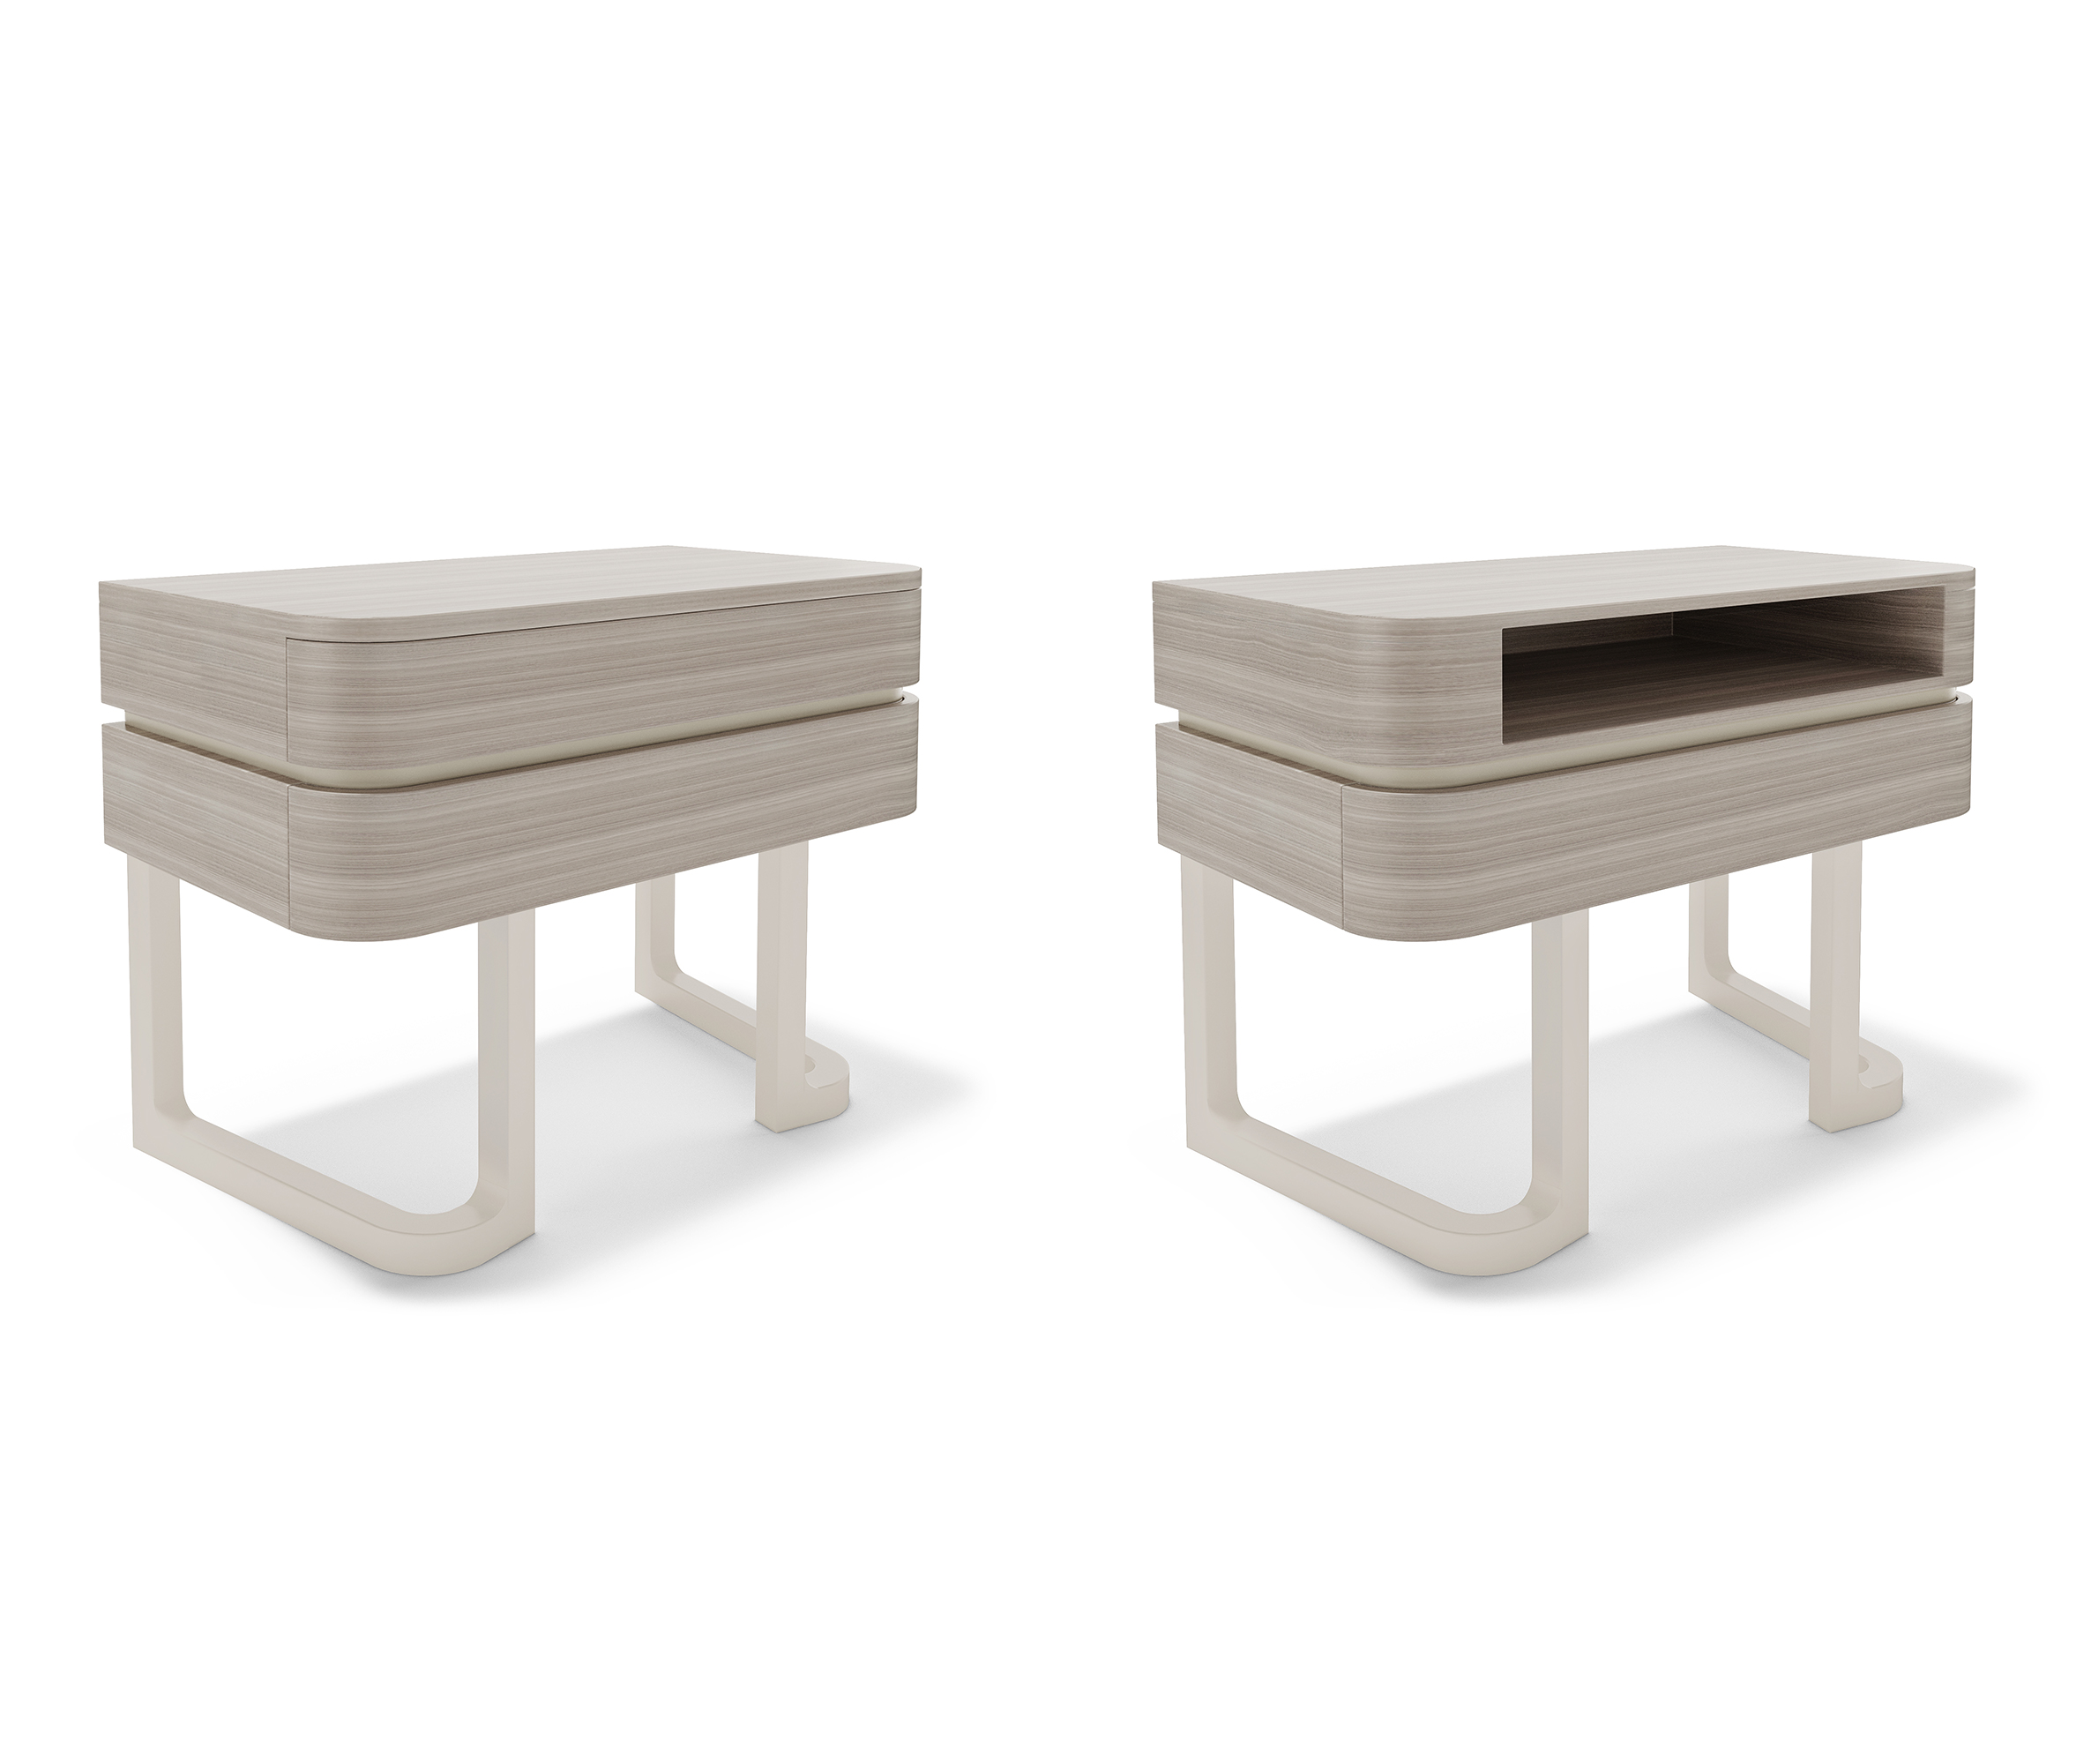 Cliff Young Ltd_Zarra Nightstands_int_products